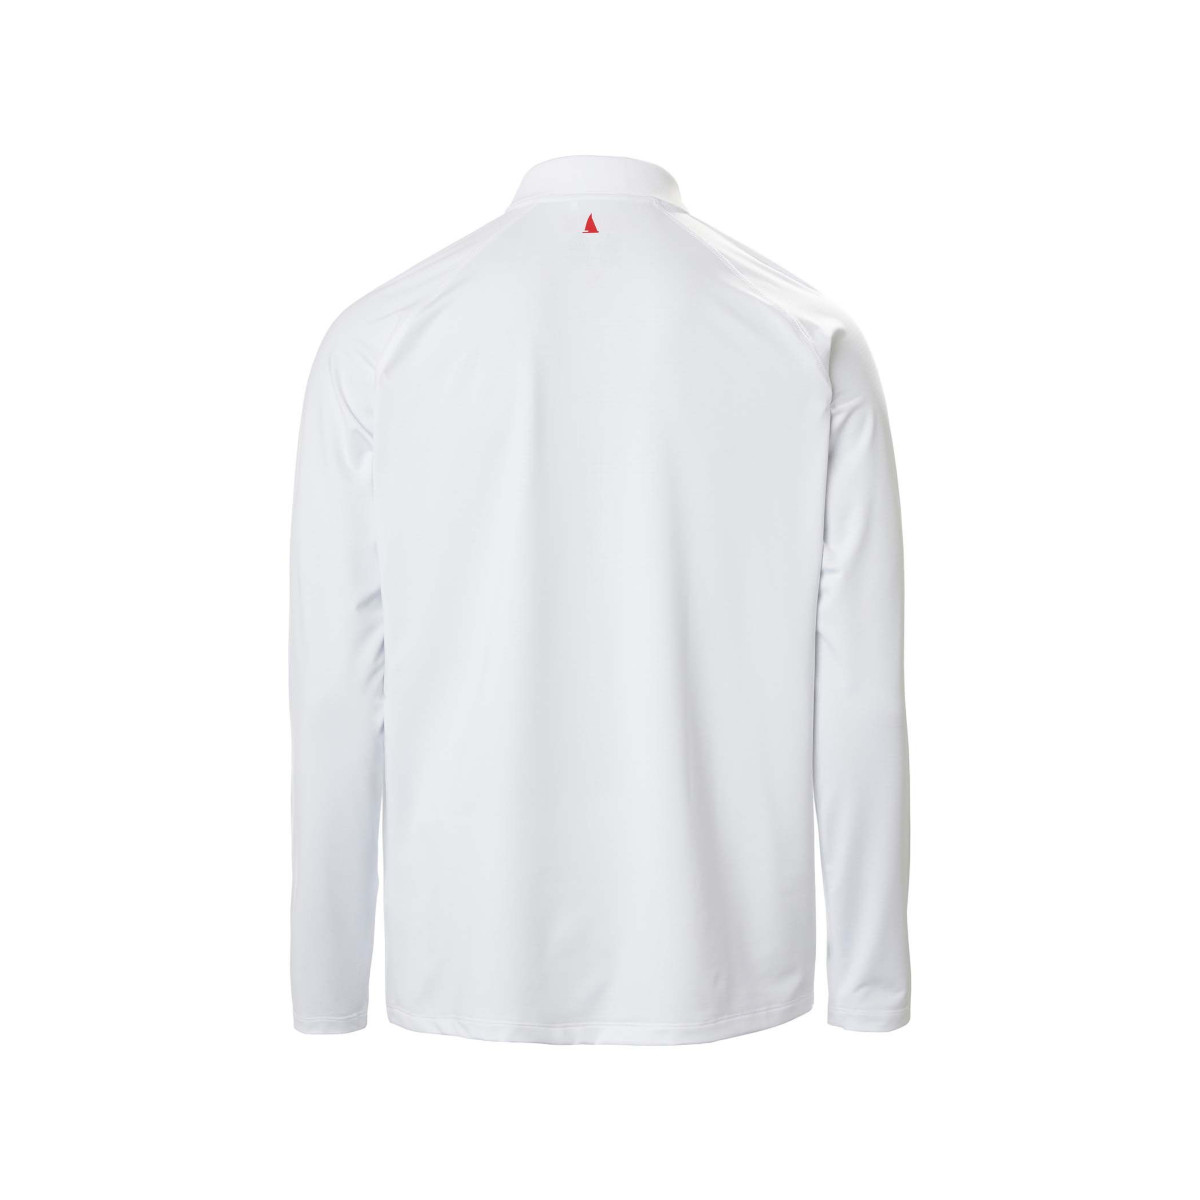 Musto Evolution Sunblock polo 2.0 manches longues homme blanc, taille S